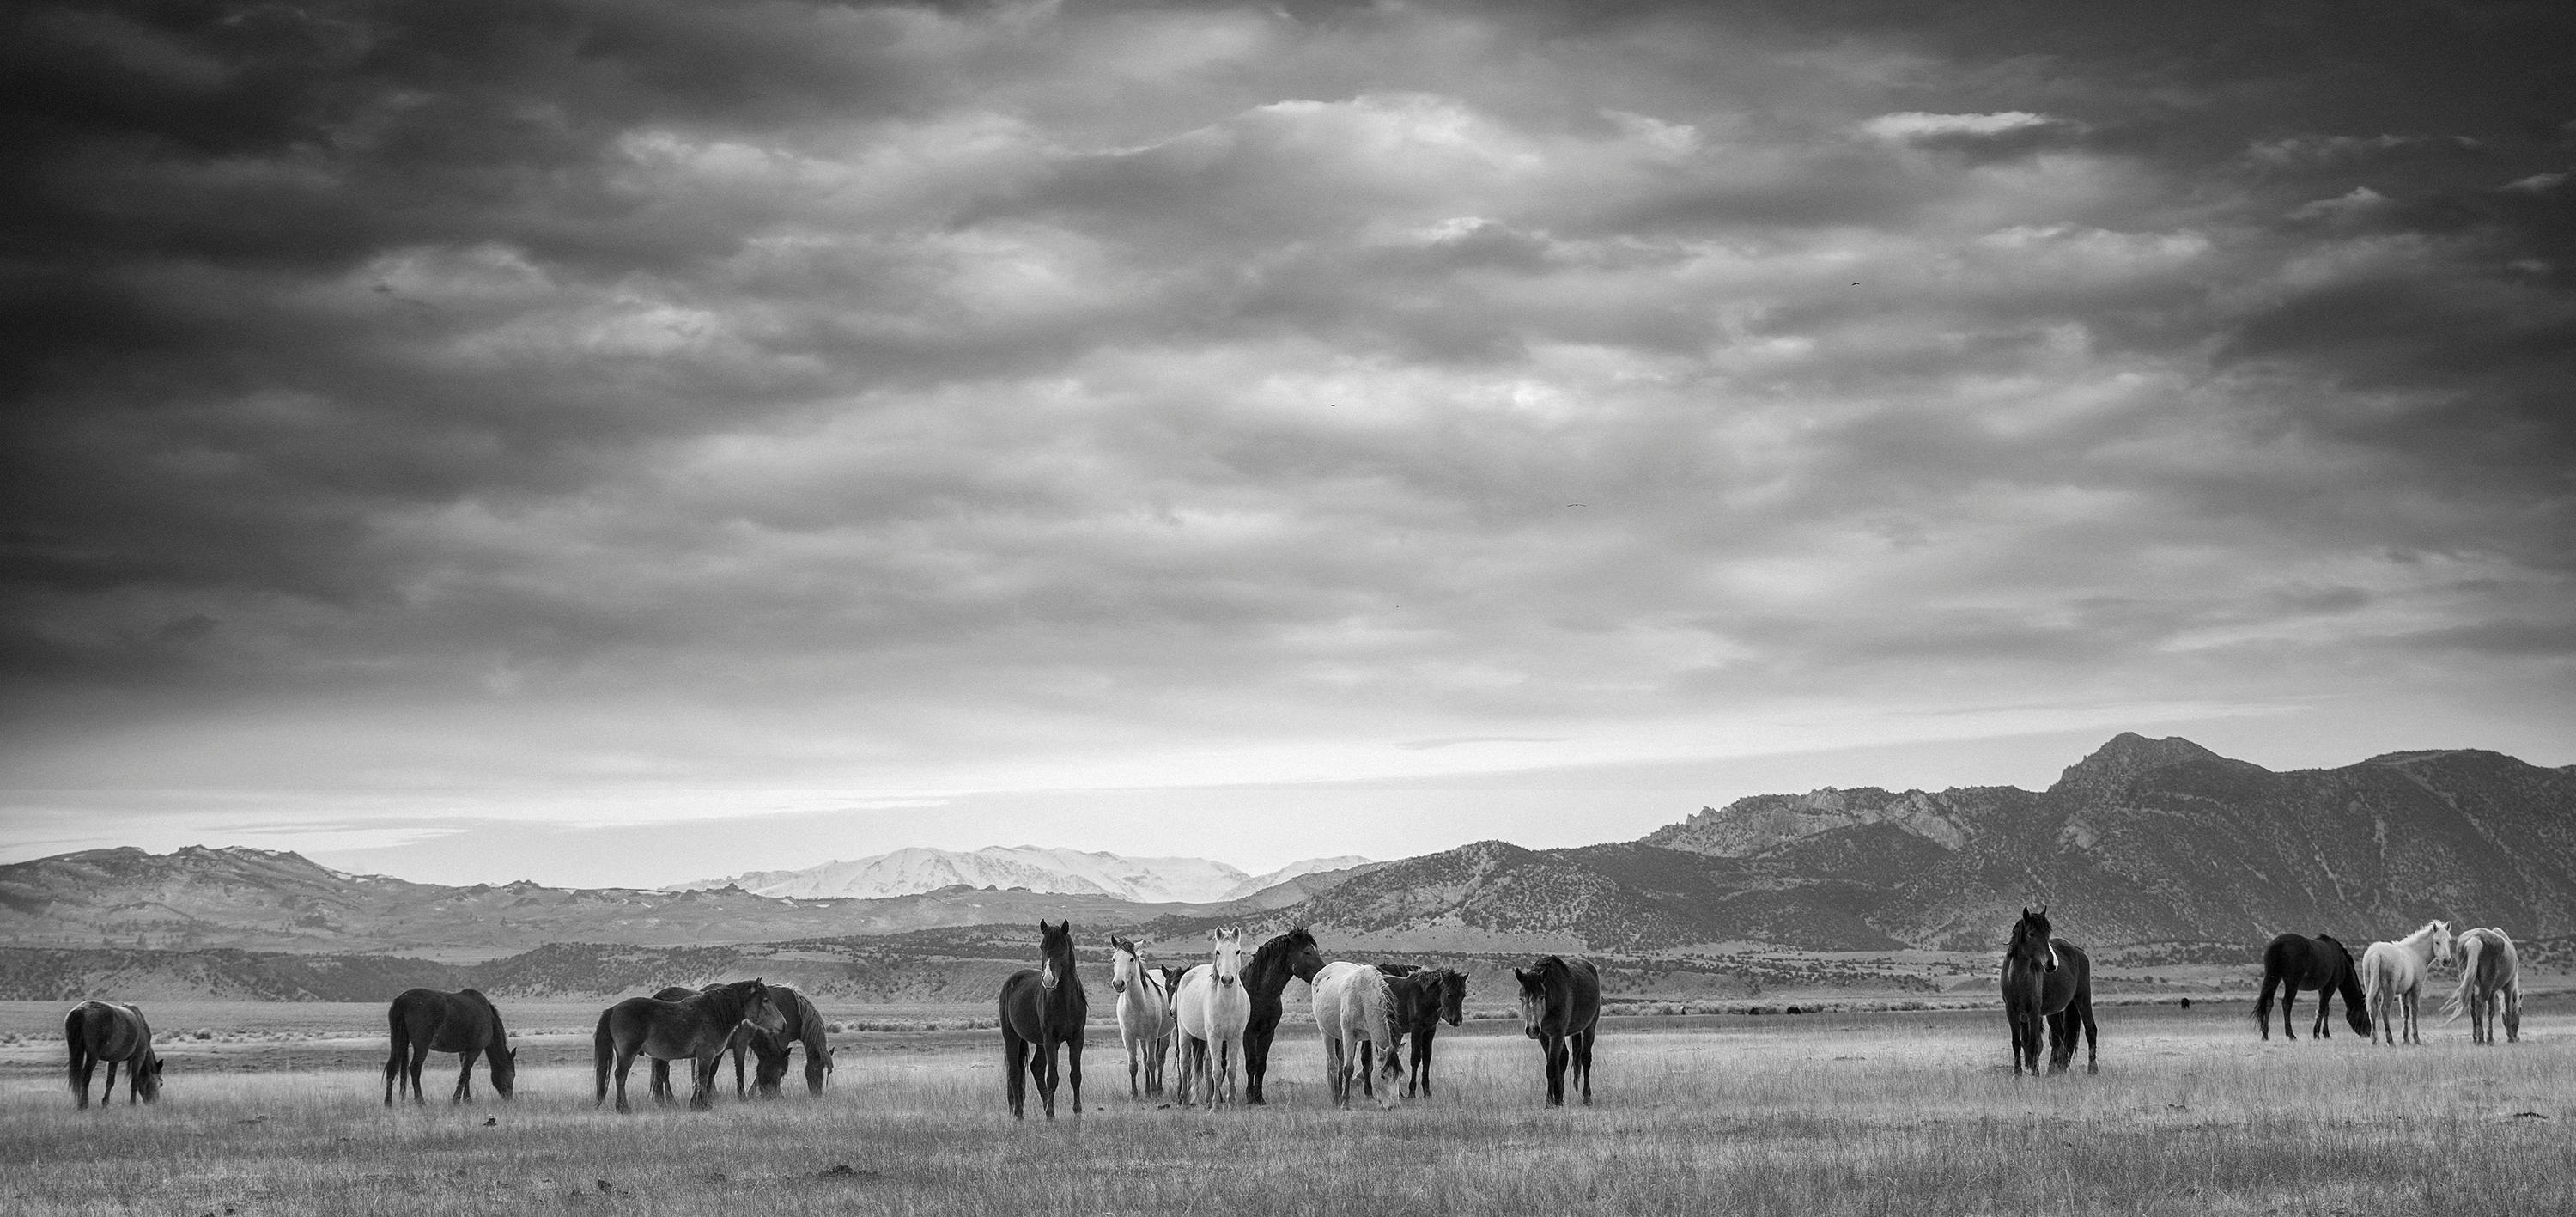 Black and White Wild Horse Photography, Mustangs "Gangs All Here" 90x40 ,Signed